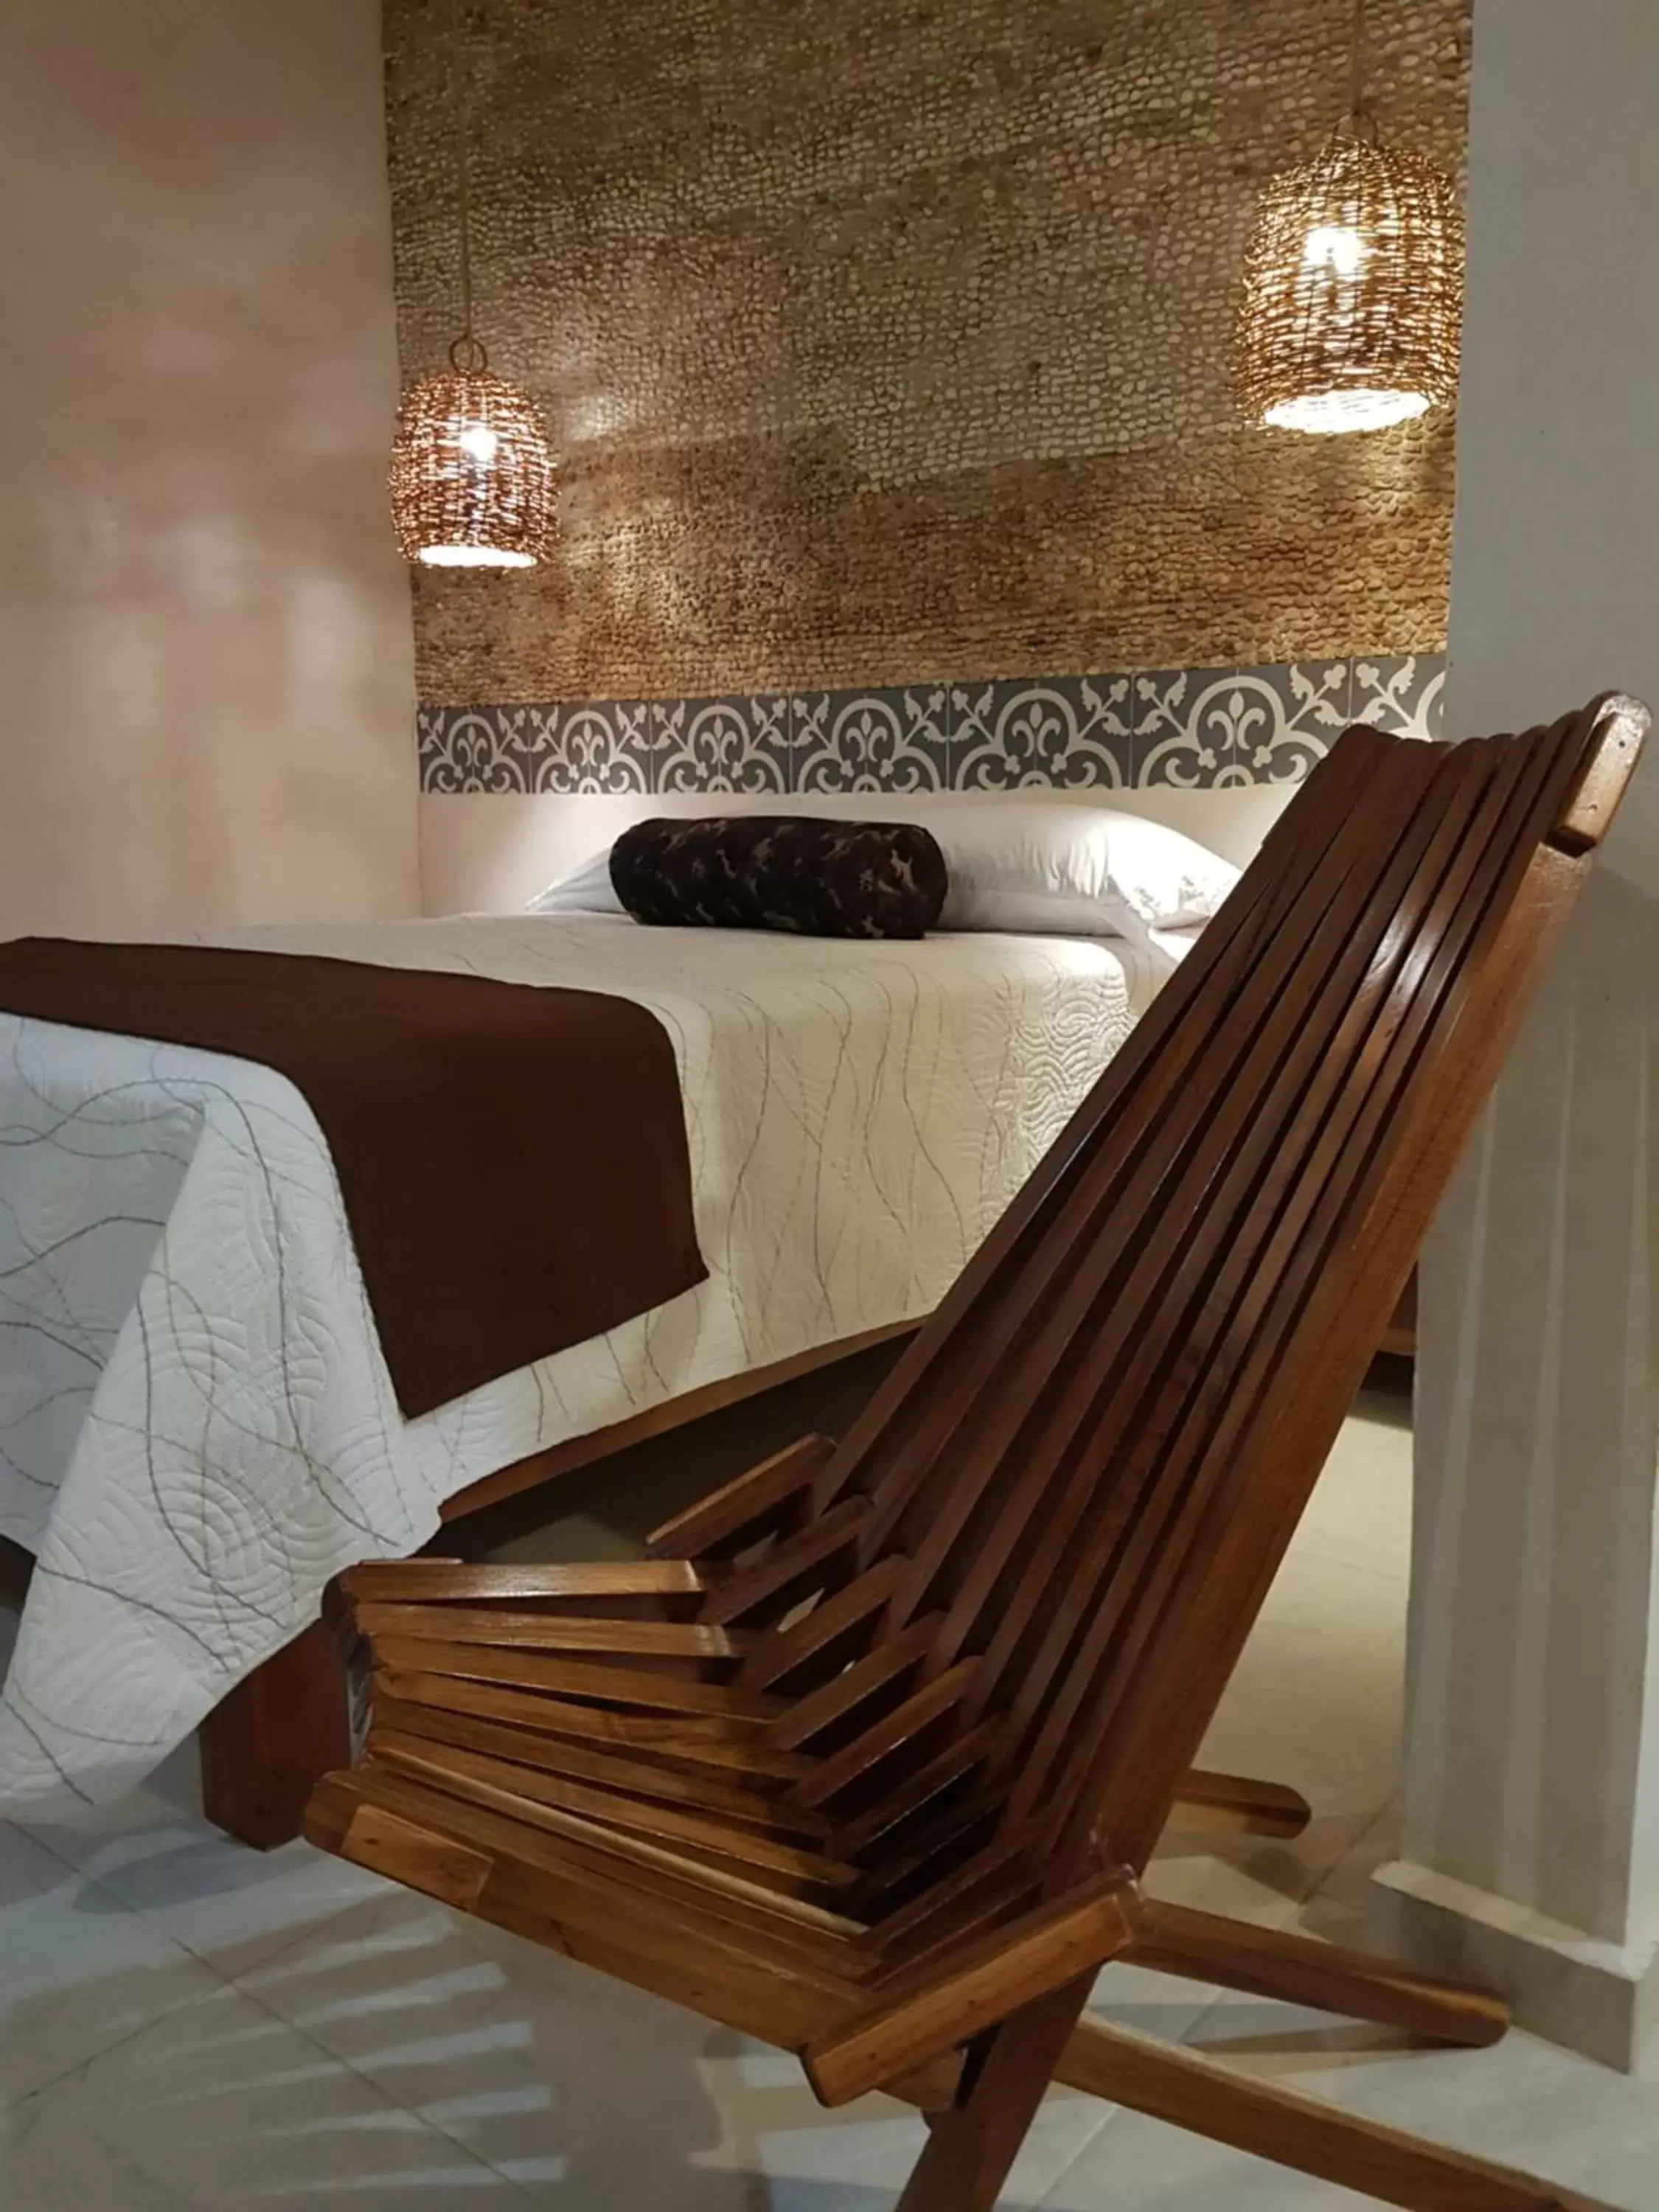 Bed in Hotel Boutique Bugambilias